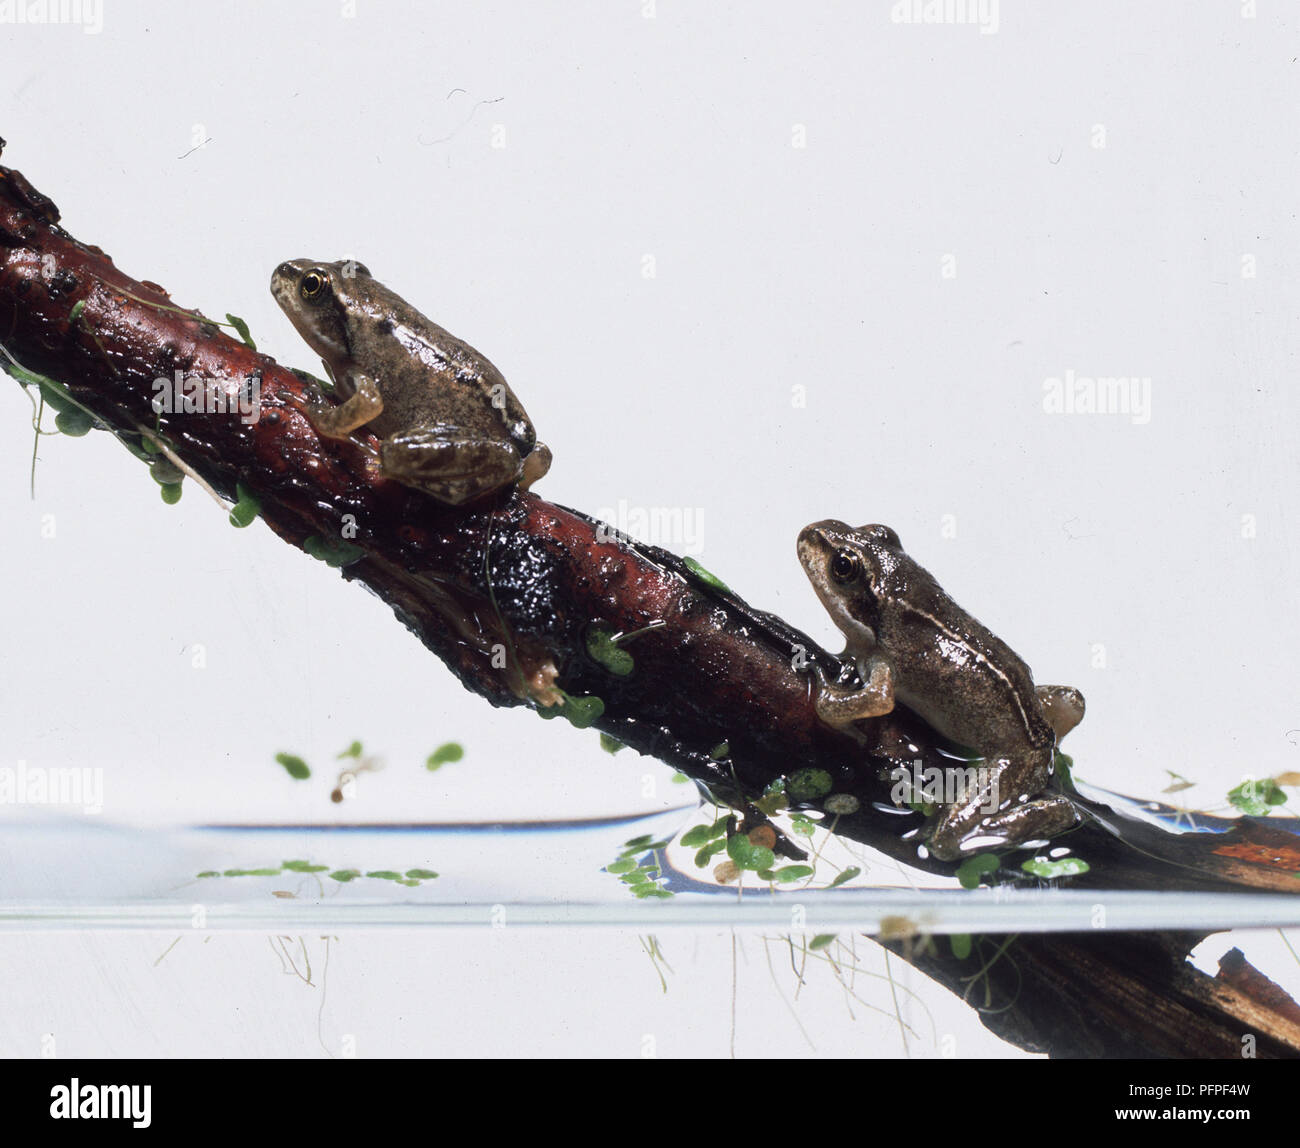 Two Common Frogs (Rana temporaria) sitting on wet branch, just above water Stock Photo